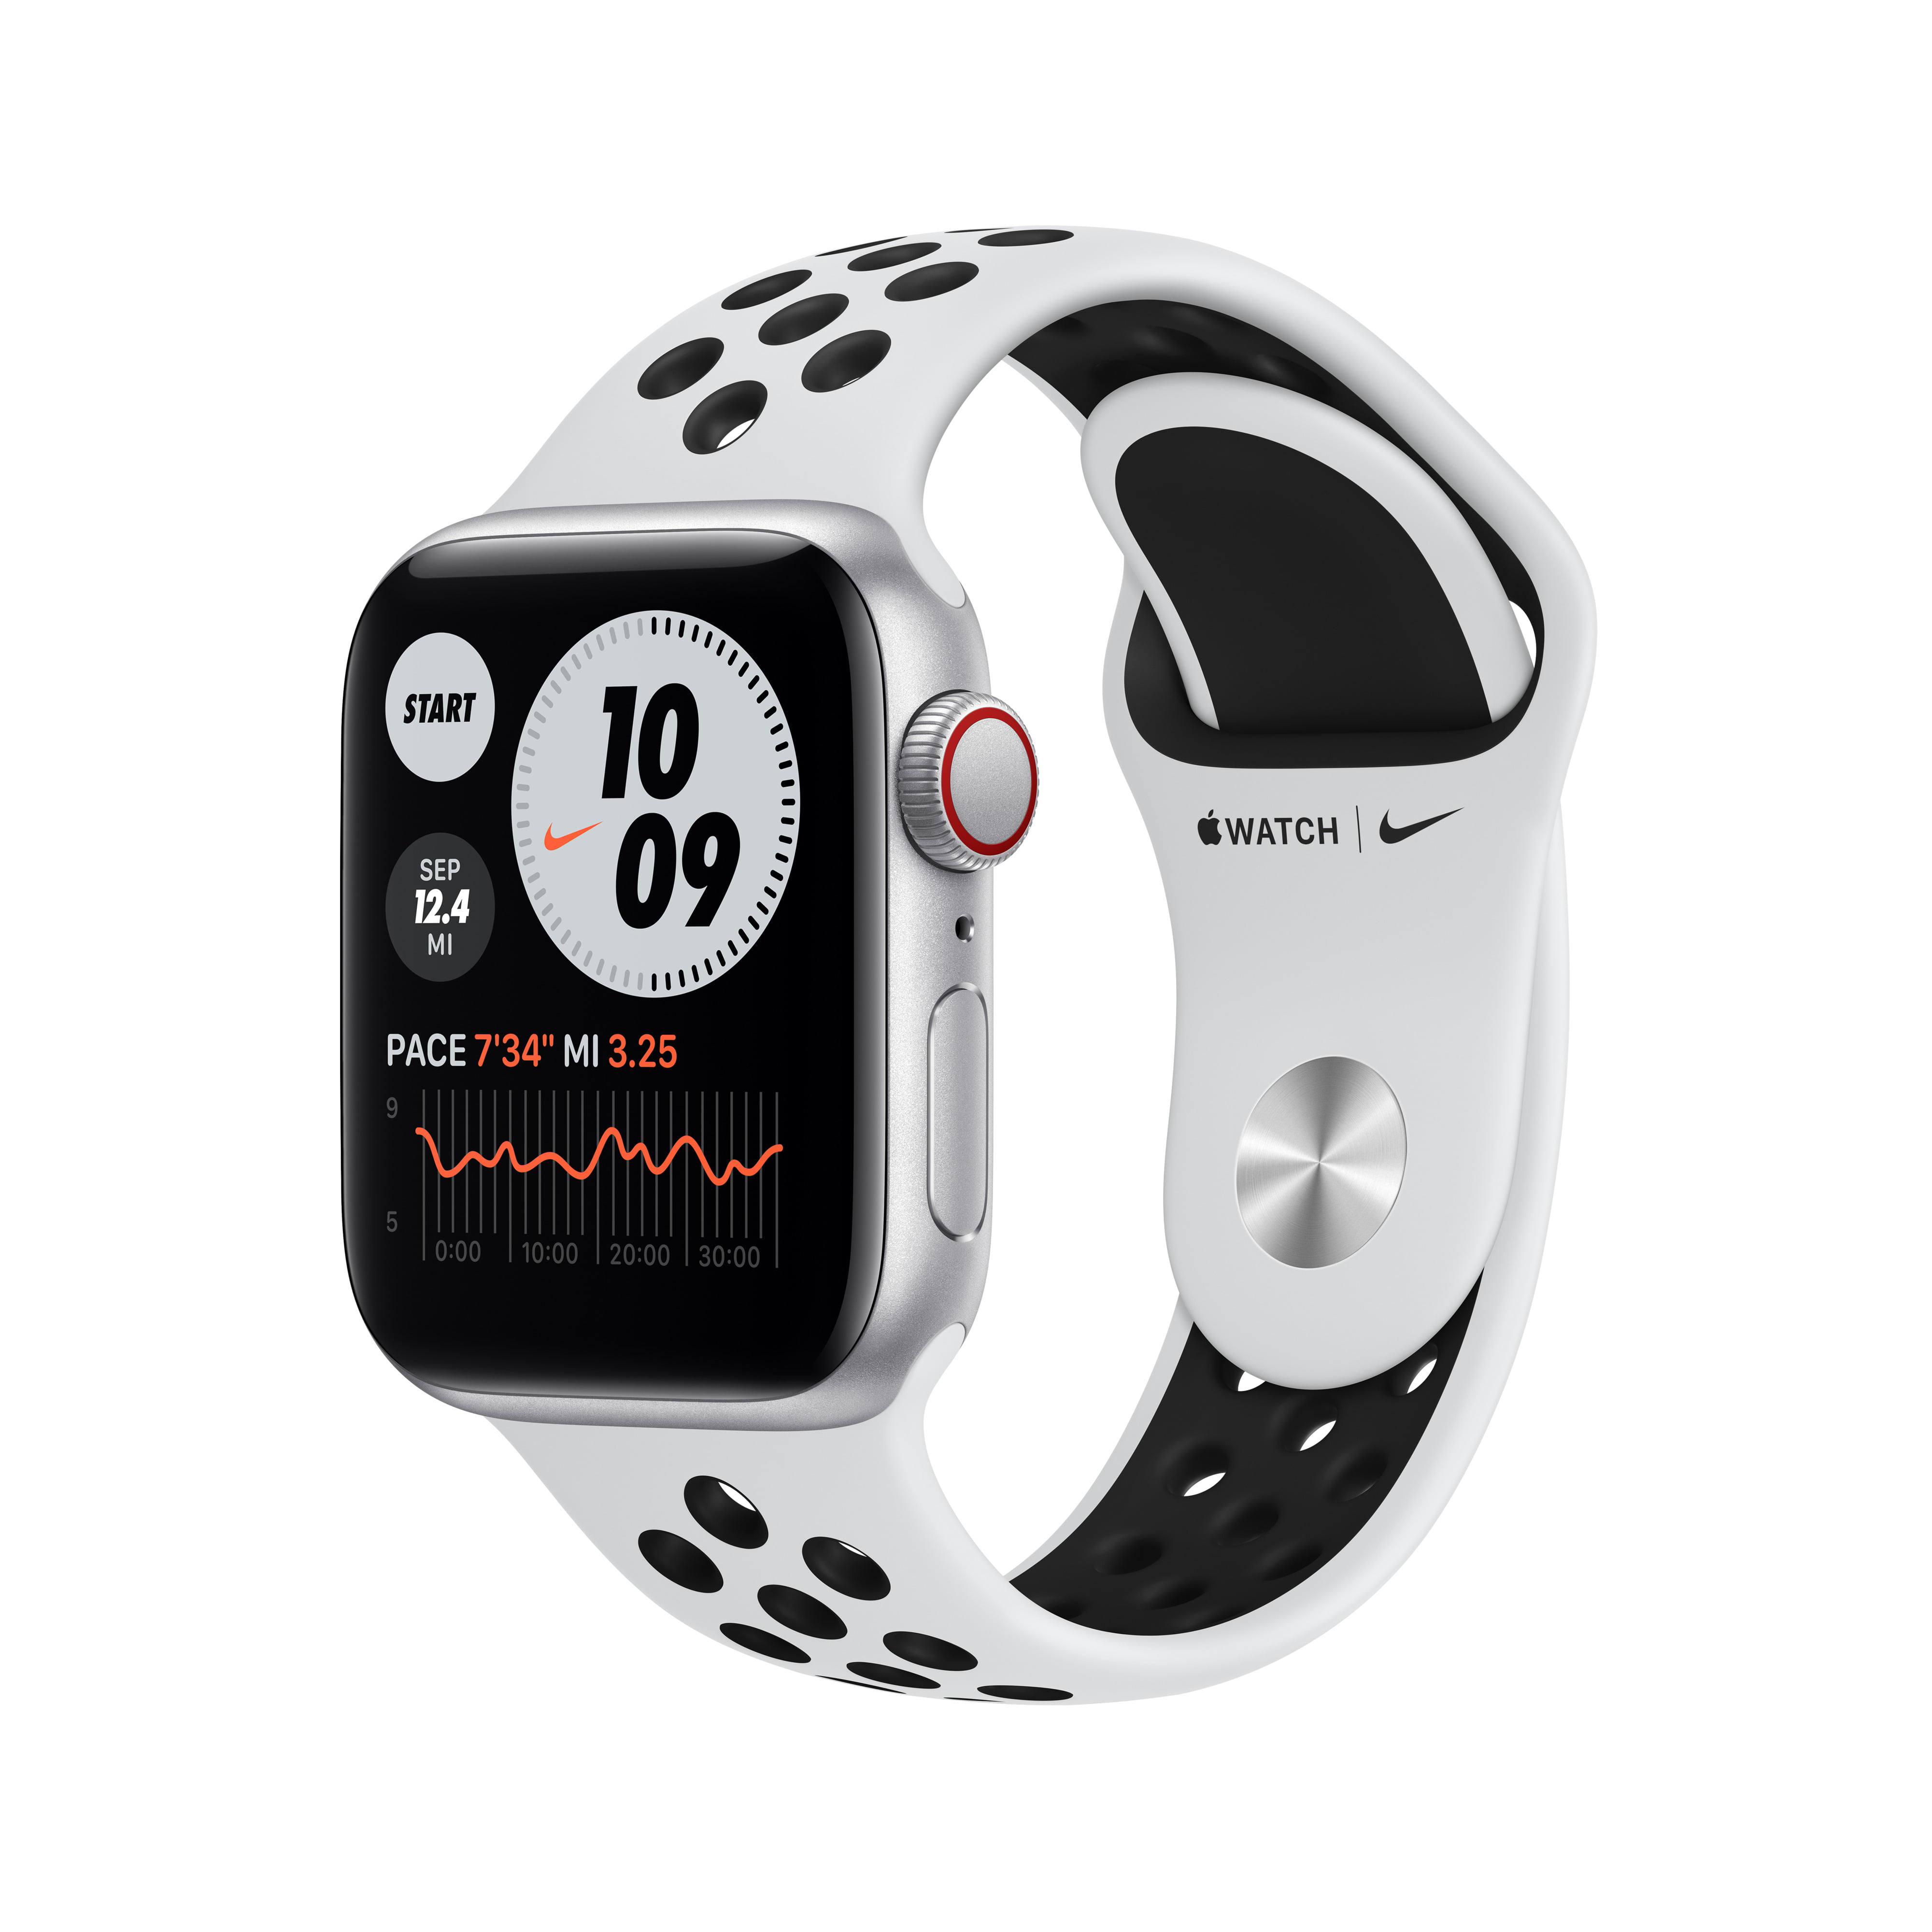 Apple Watch Nike SE (1st Gen) GPS + Cellular, 40mm Silver Aluminum Case with Pure Platinum/Black Nike Sport Band - Regular $179 + Free Shipping